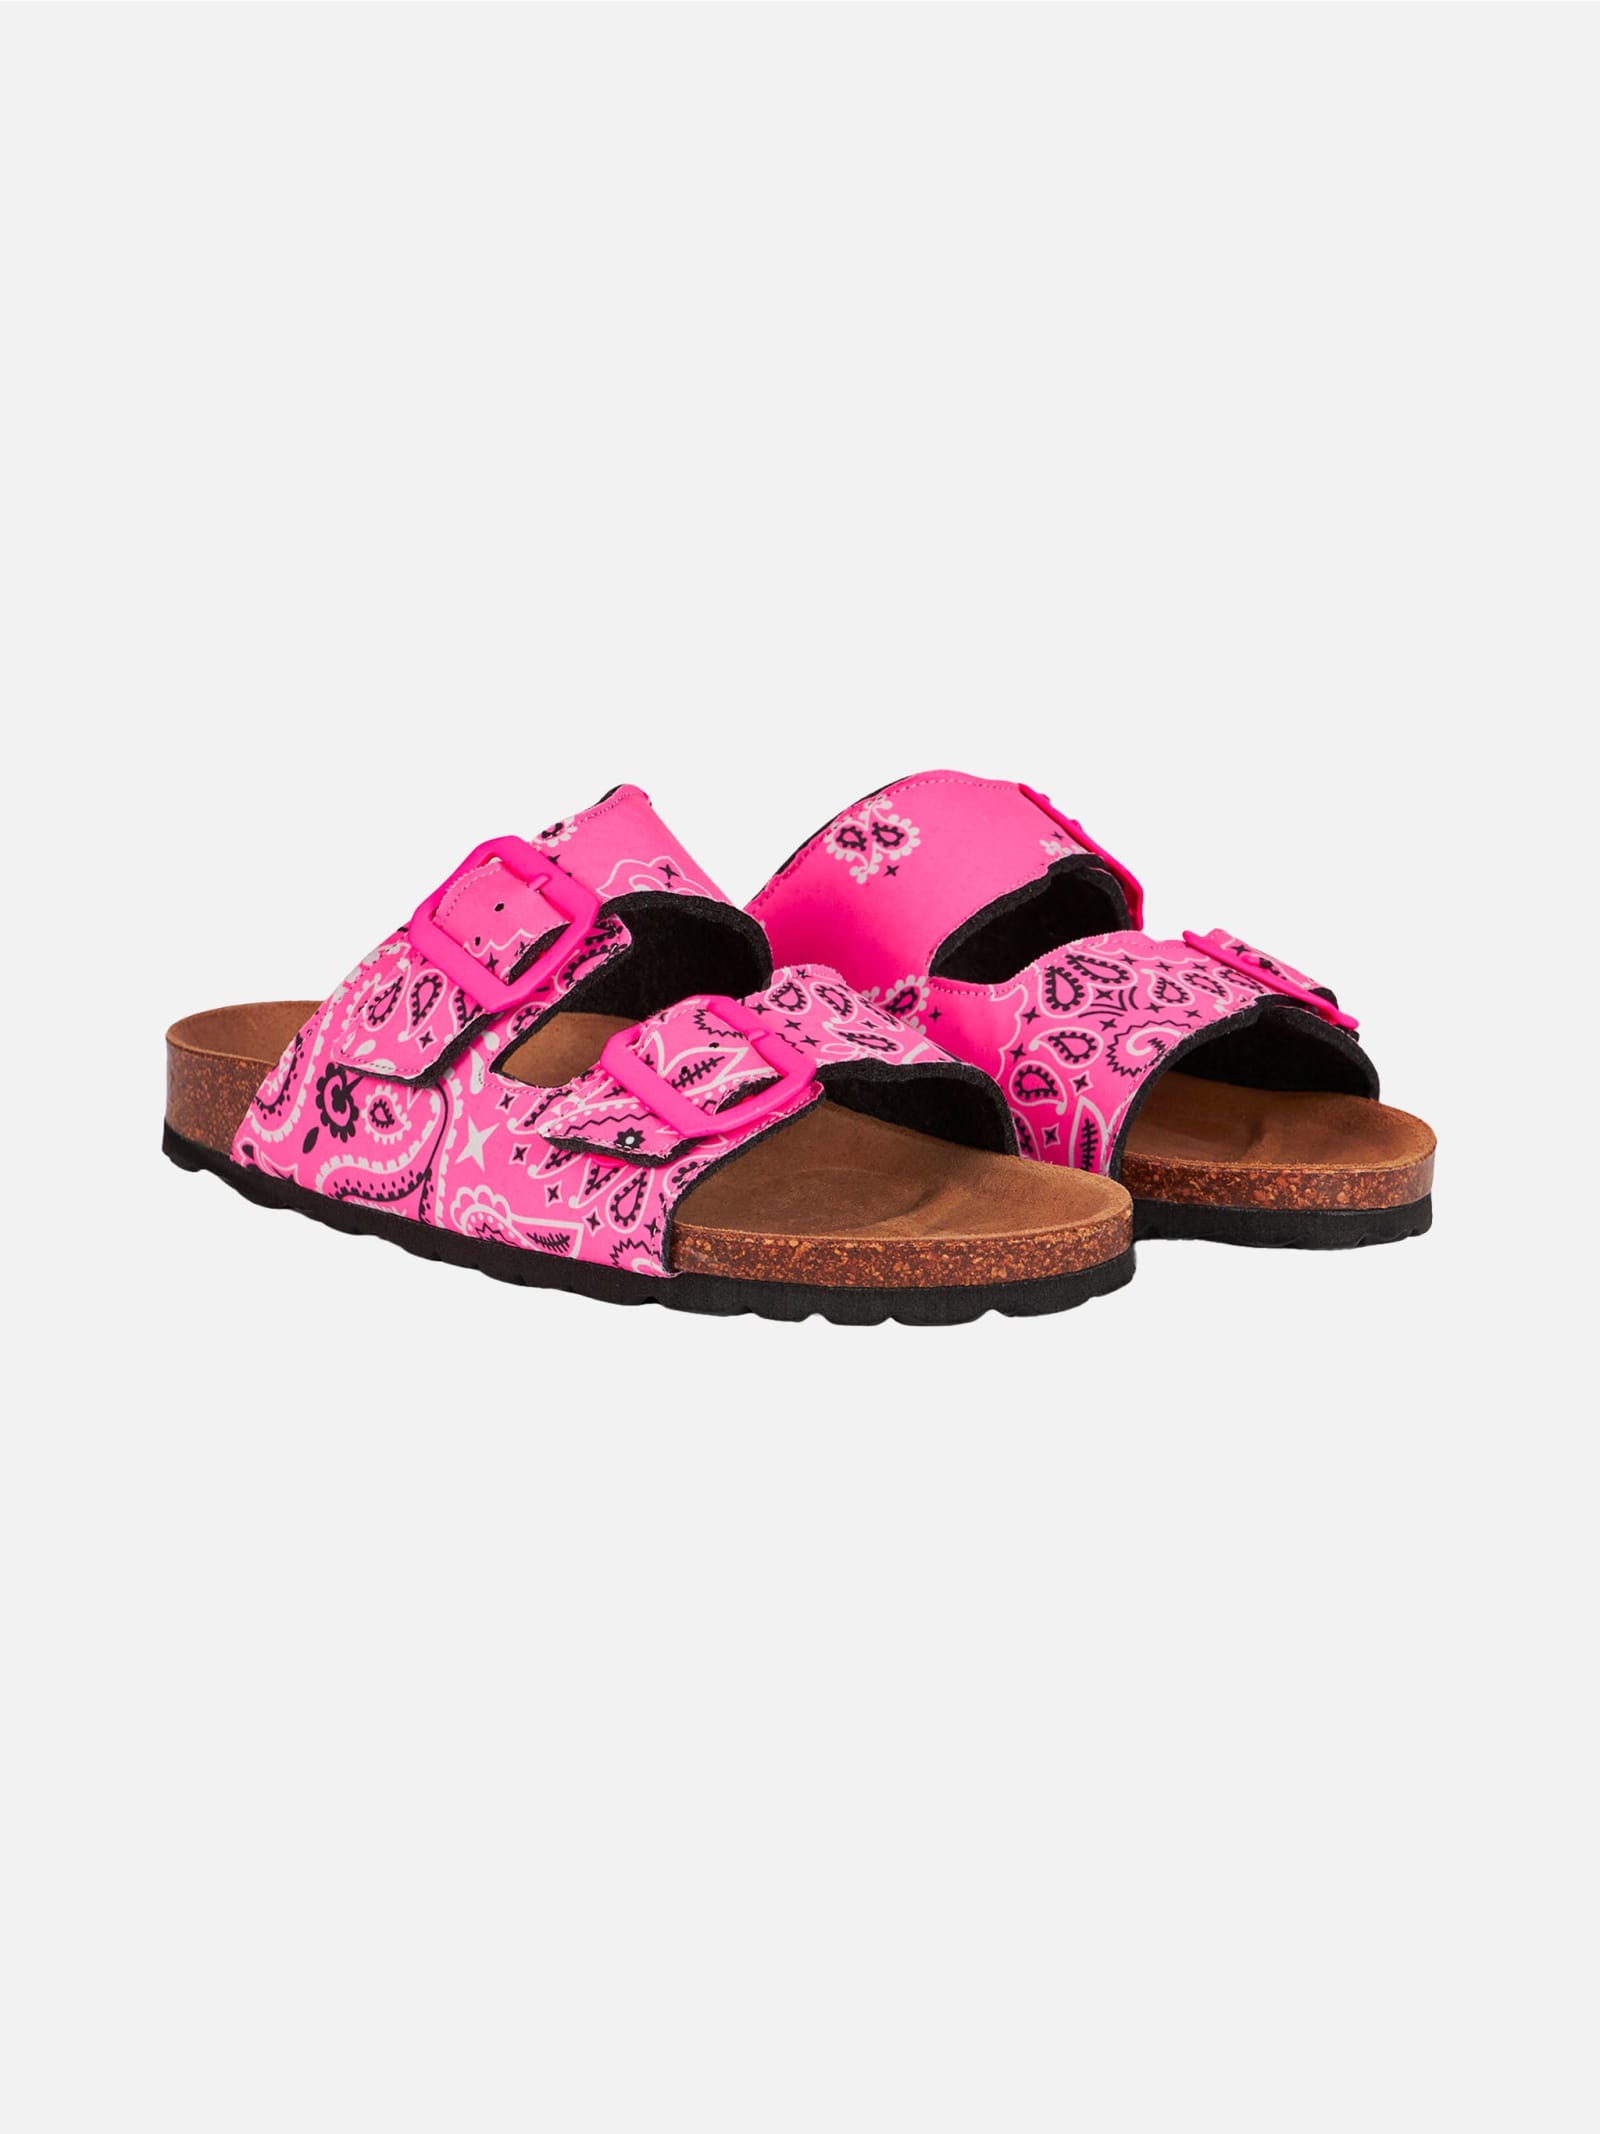 Woman Sandals With Pink Bandanna Print